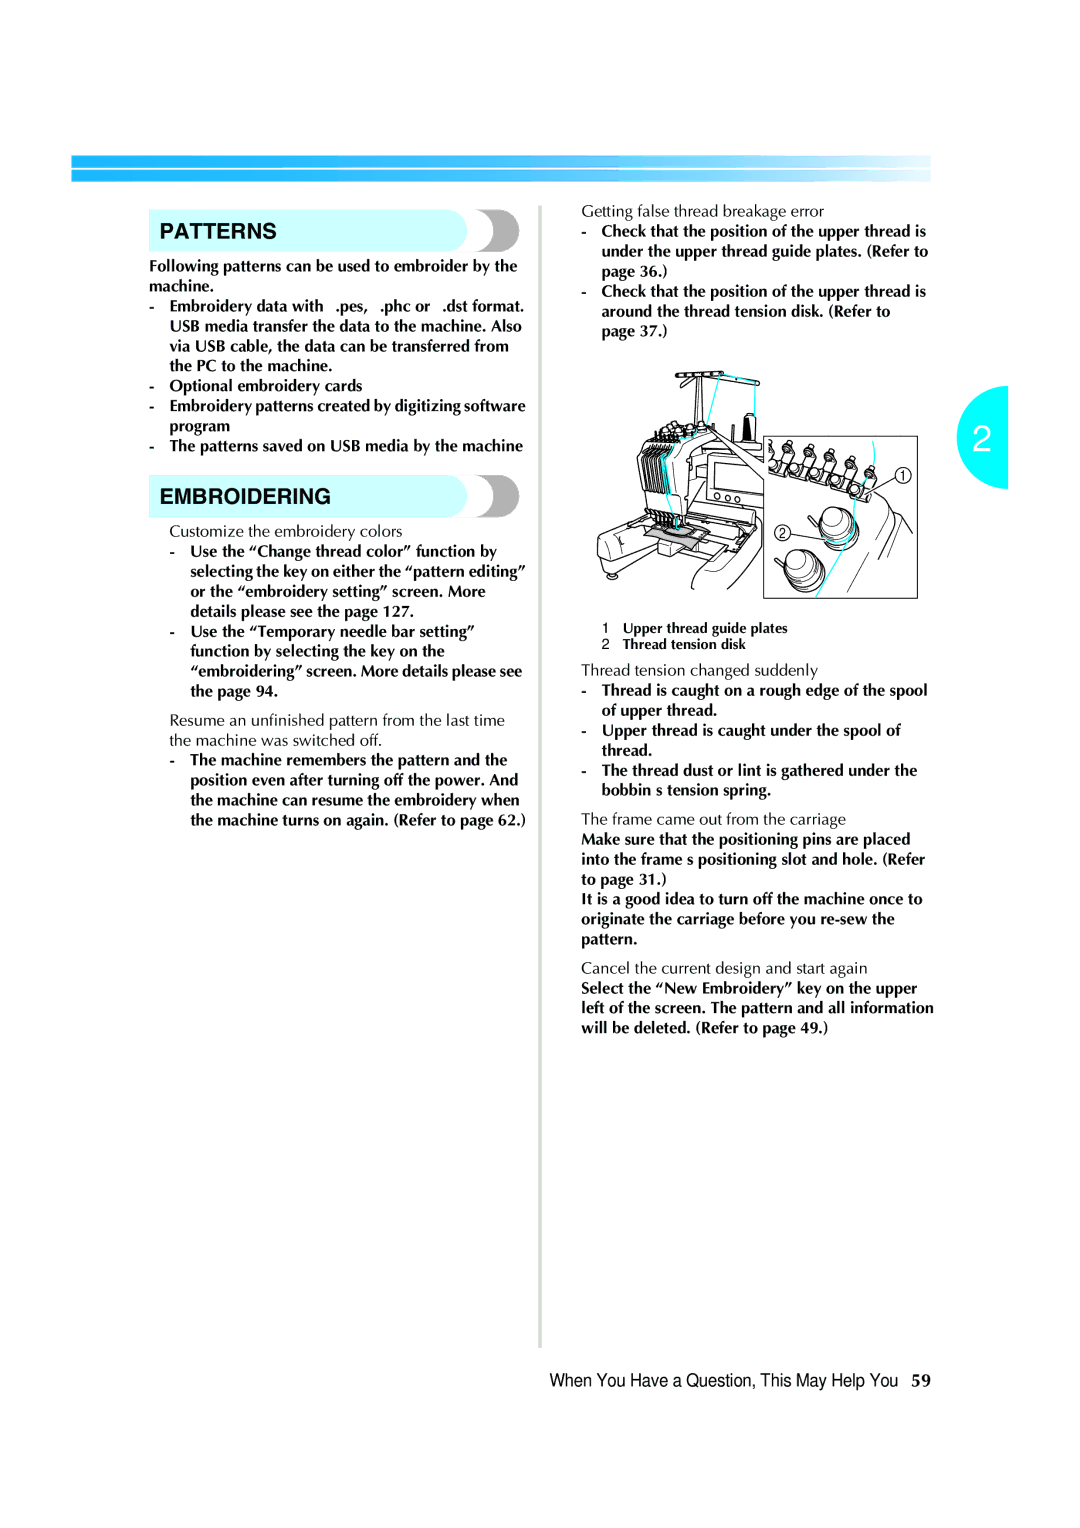 Brother PR-620 operation manual When You Have a Question, This May Help You, Customize the embroidery colors 